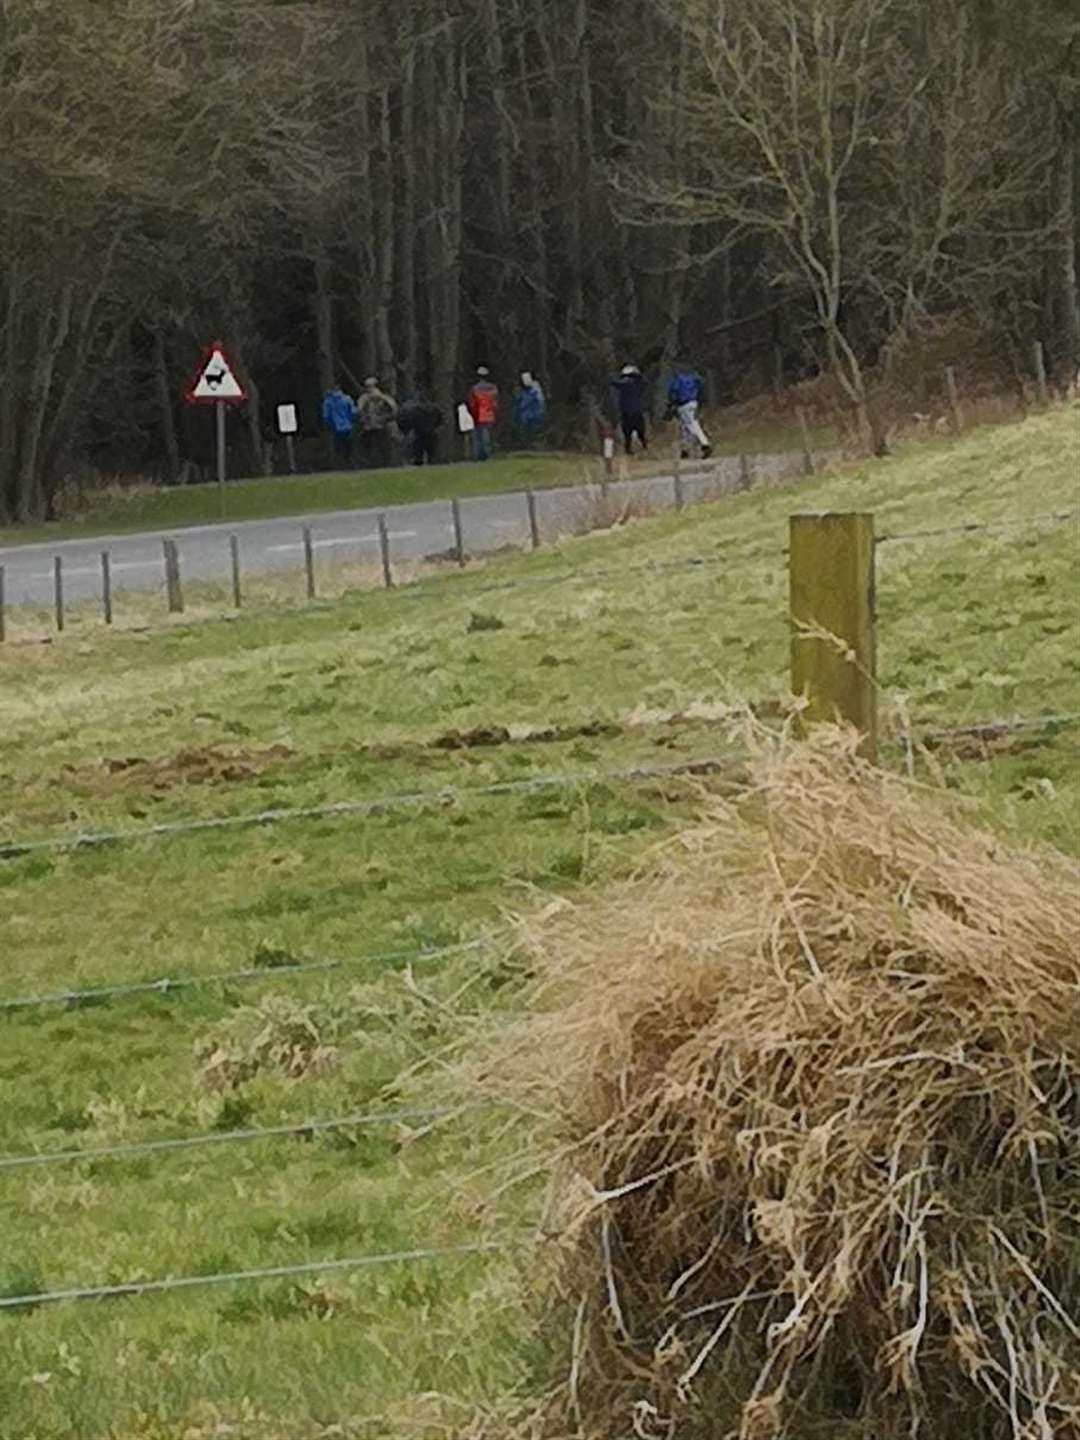 A group of individuals were spotted heading into the Fyvie Castle estate.